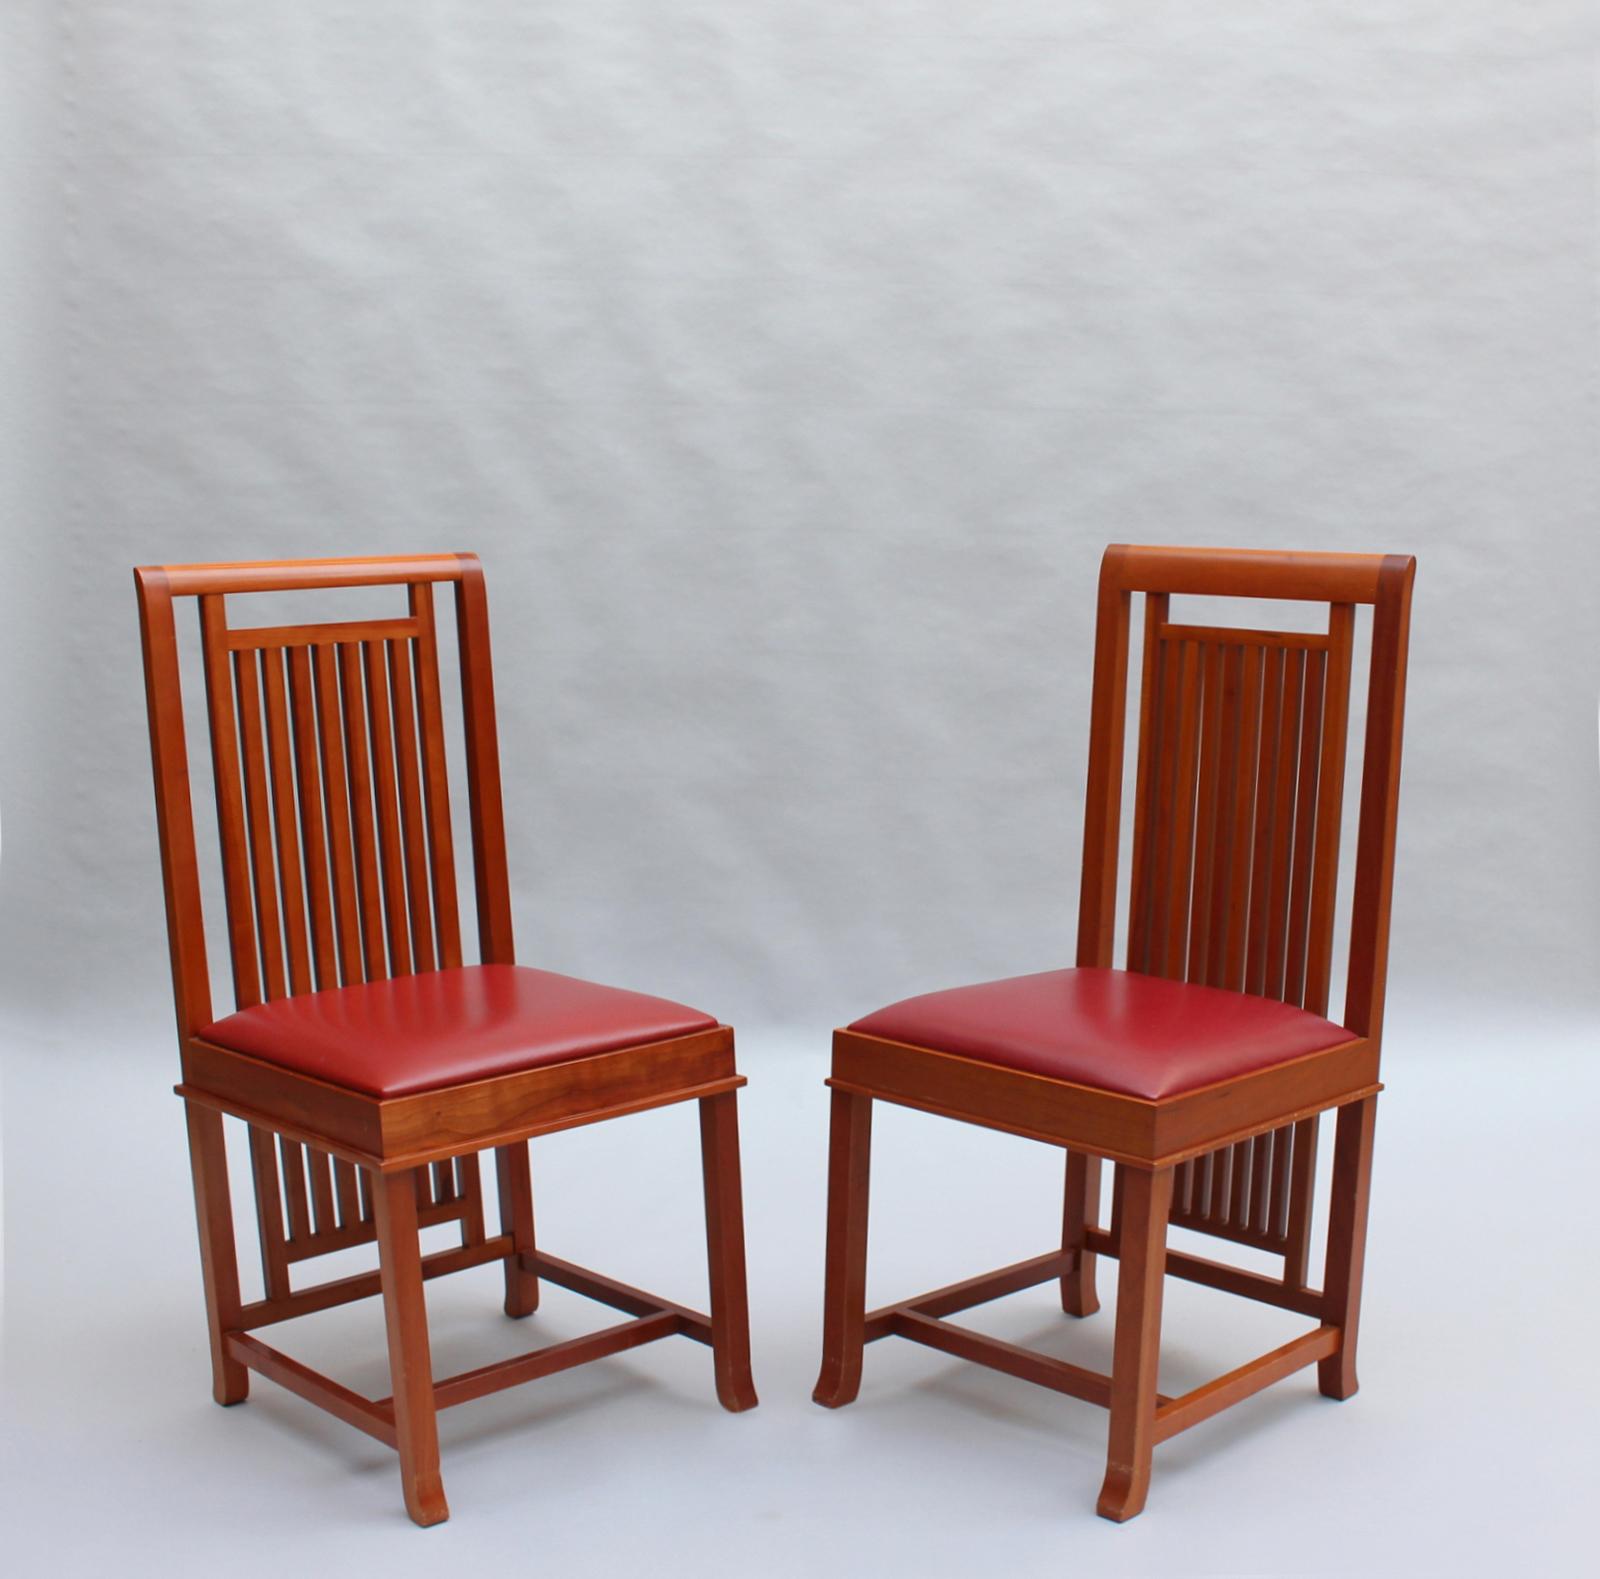 Frank Lloyd Wright - Cassina edition 1992 - 2 side chairs in cherrywood, model 614 Coonley 2.